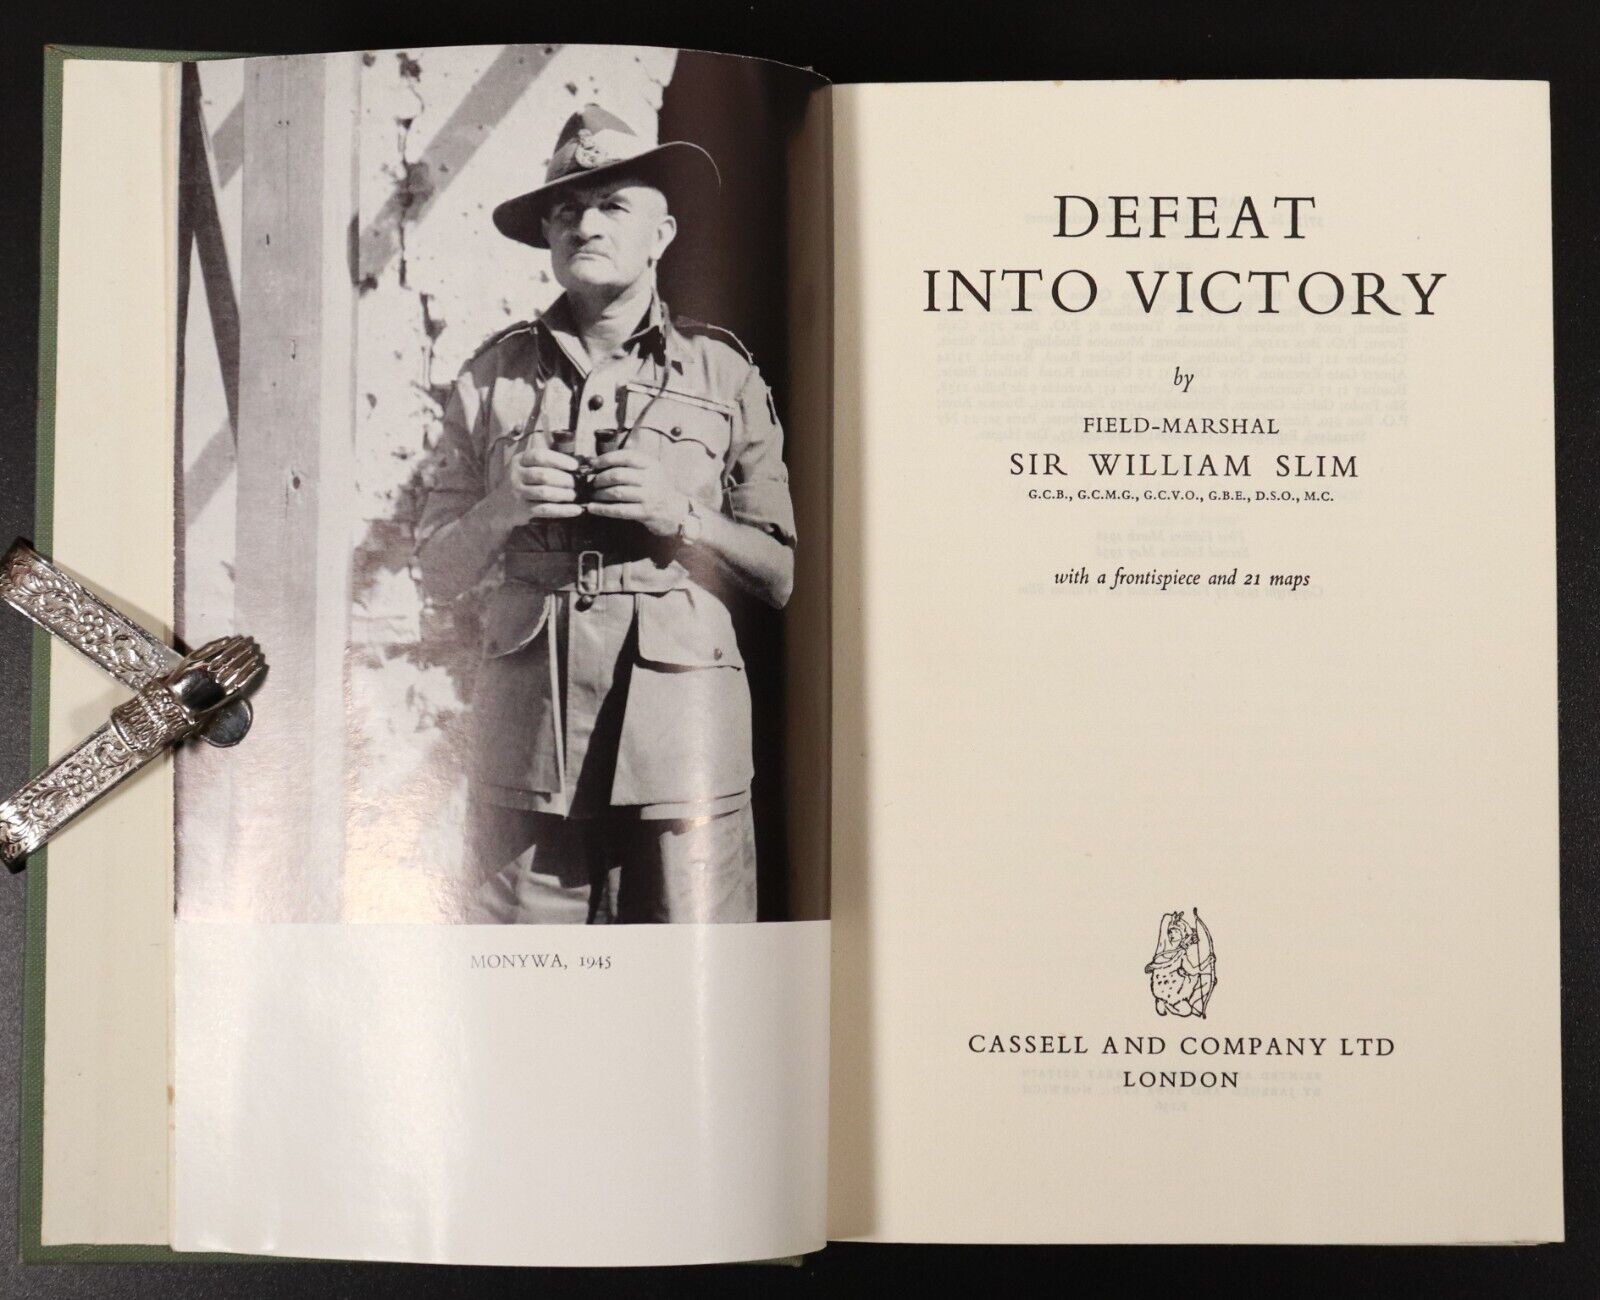 1956 Defeat Into Victory by Sir William Slim Vintage WW2 Burma Military Book - 0